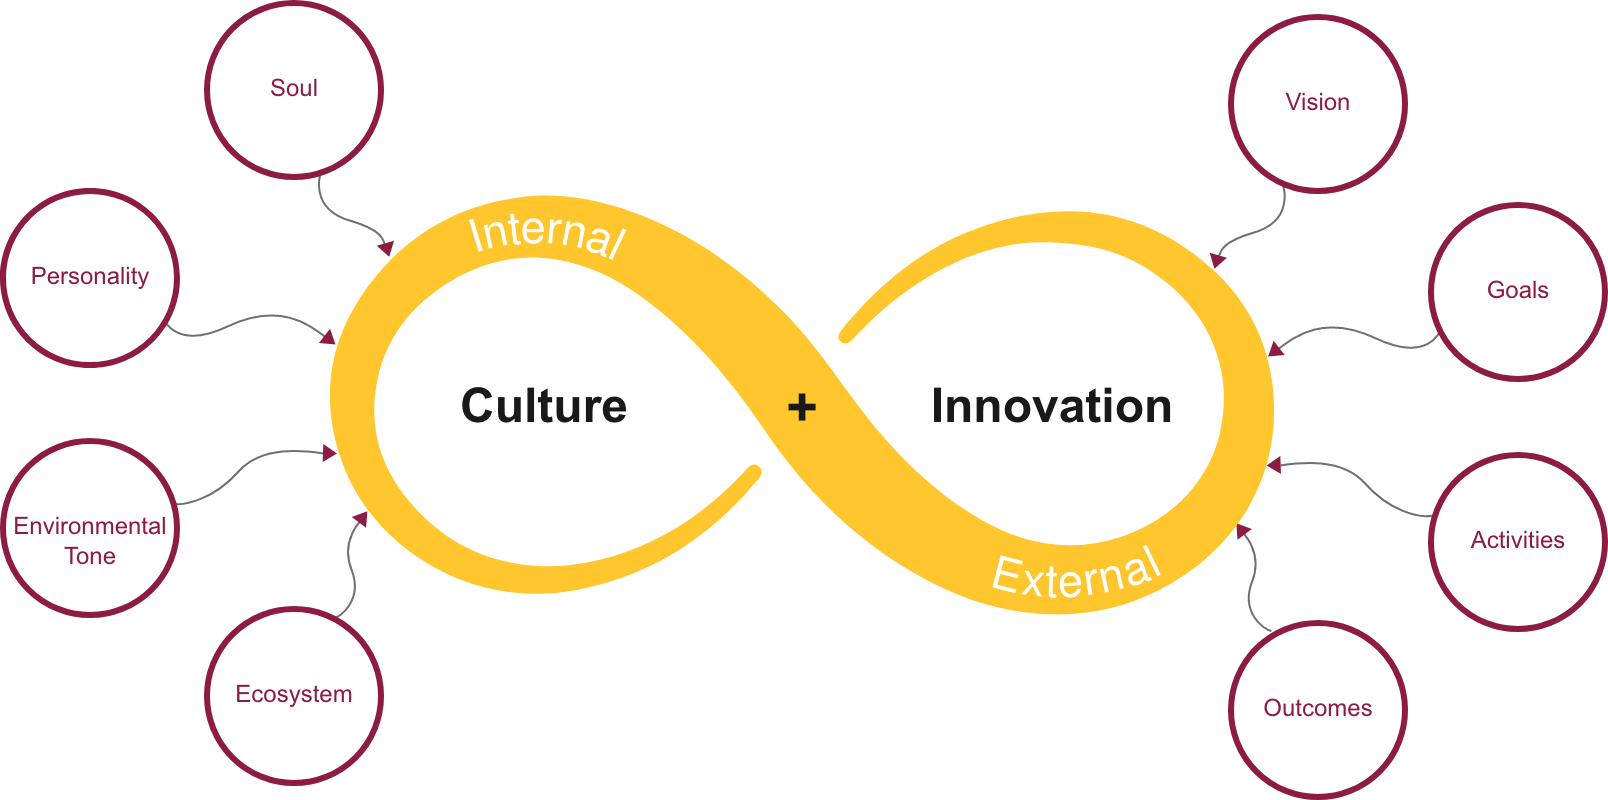 diagram regarding the importance of culture and innovation.